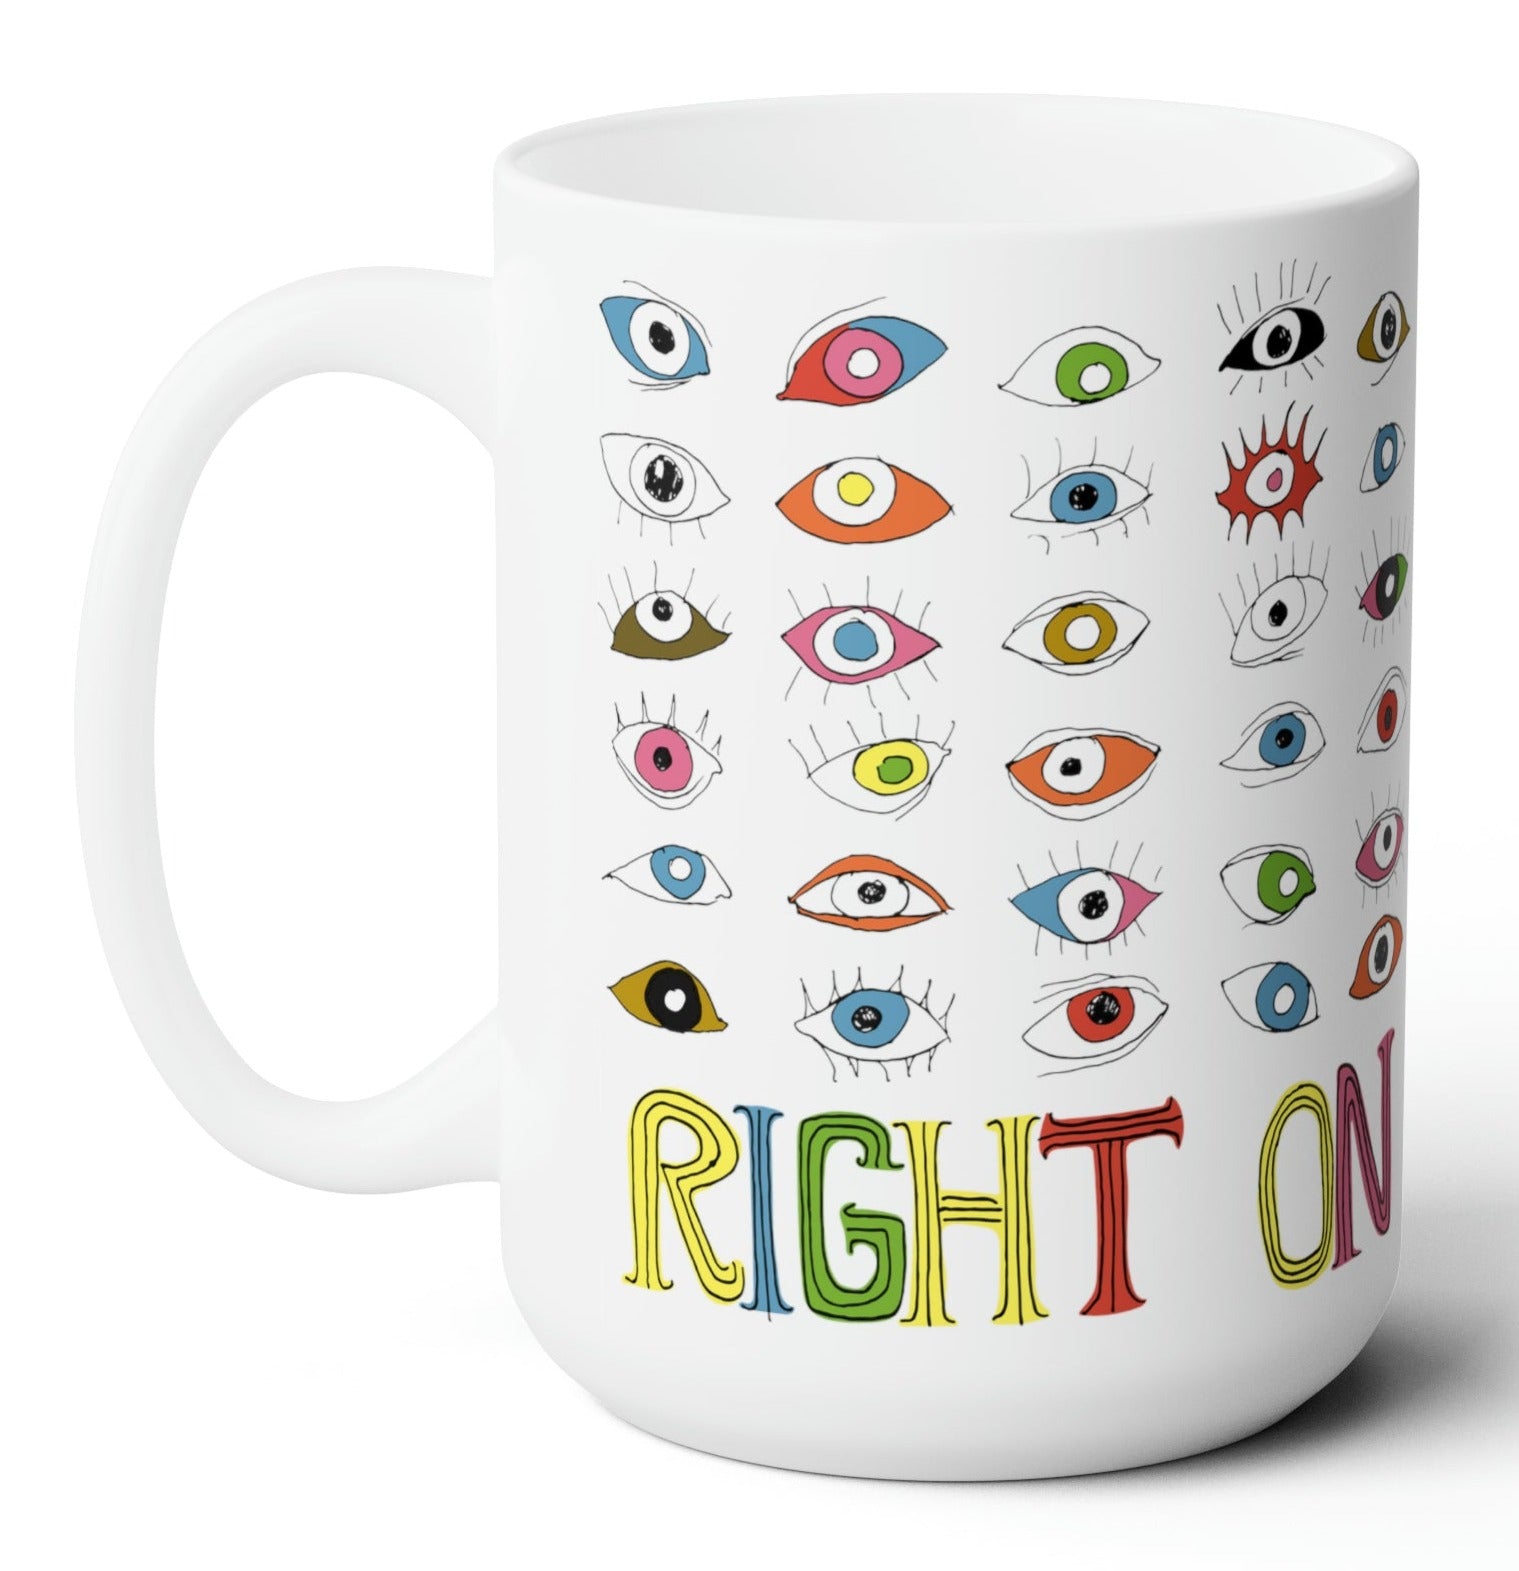 right on far out 60s style mug